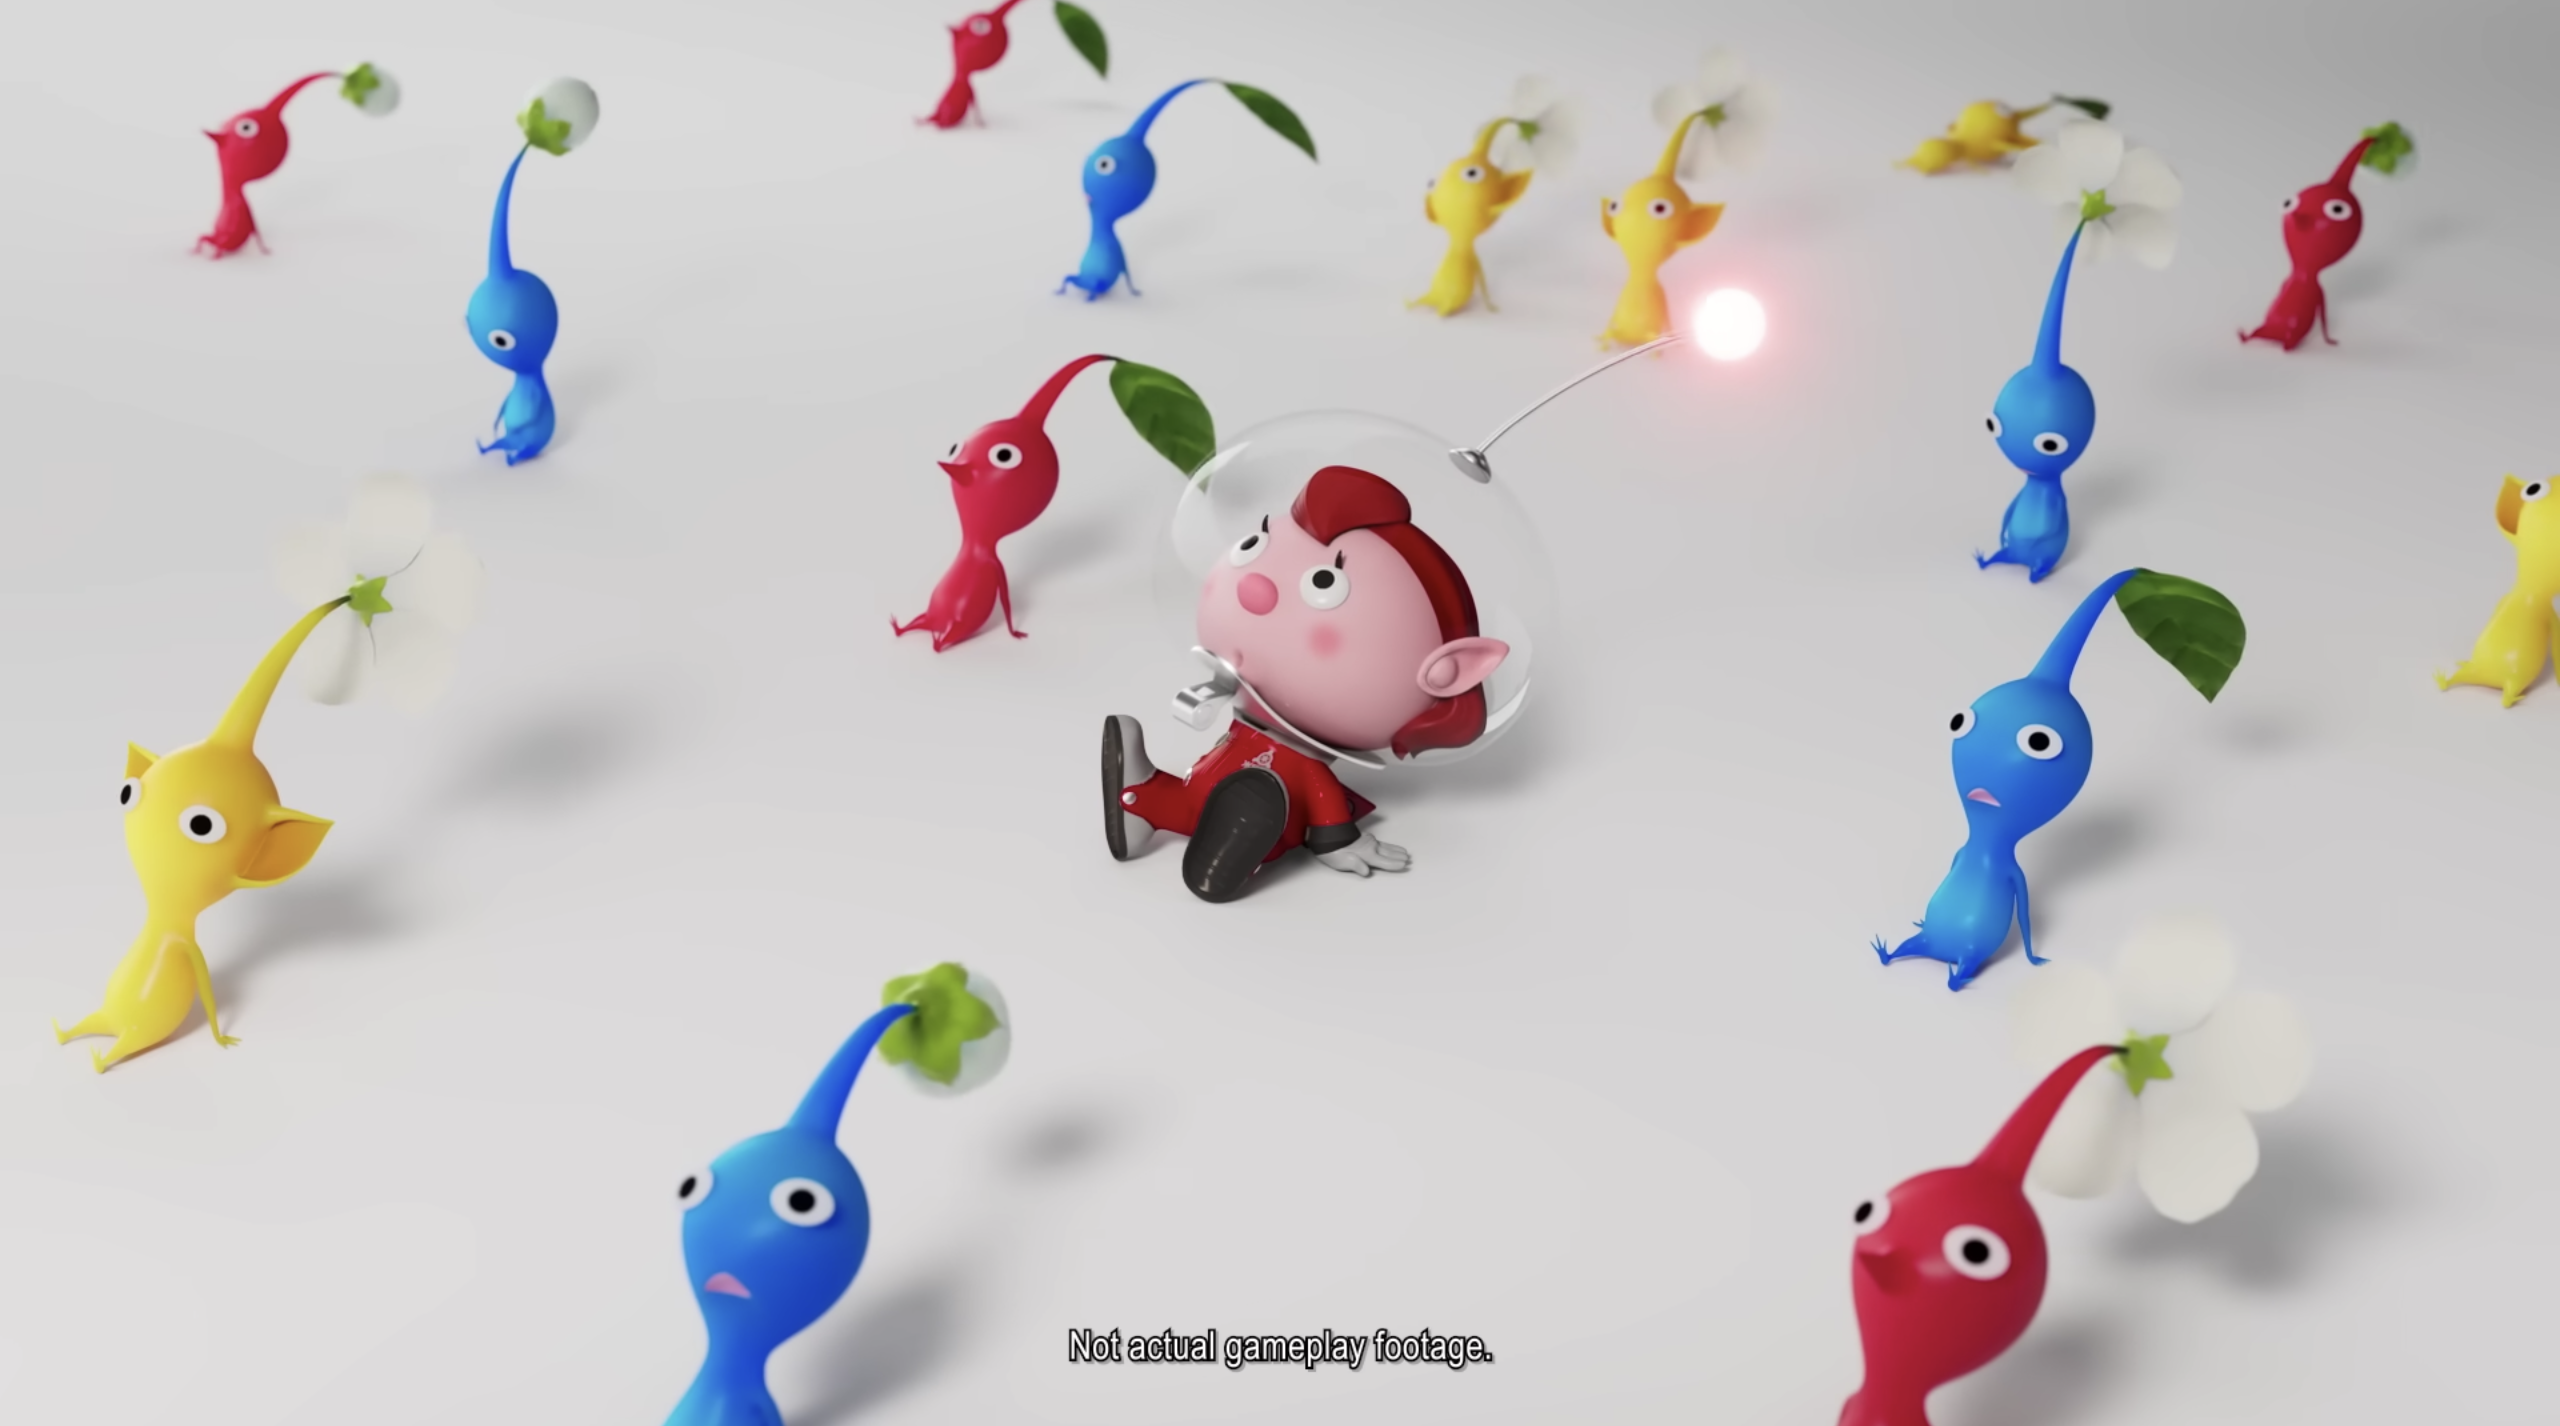 New Pikmin 4 Trailer Focuses on the Pikmin - Siliconera